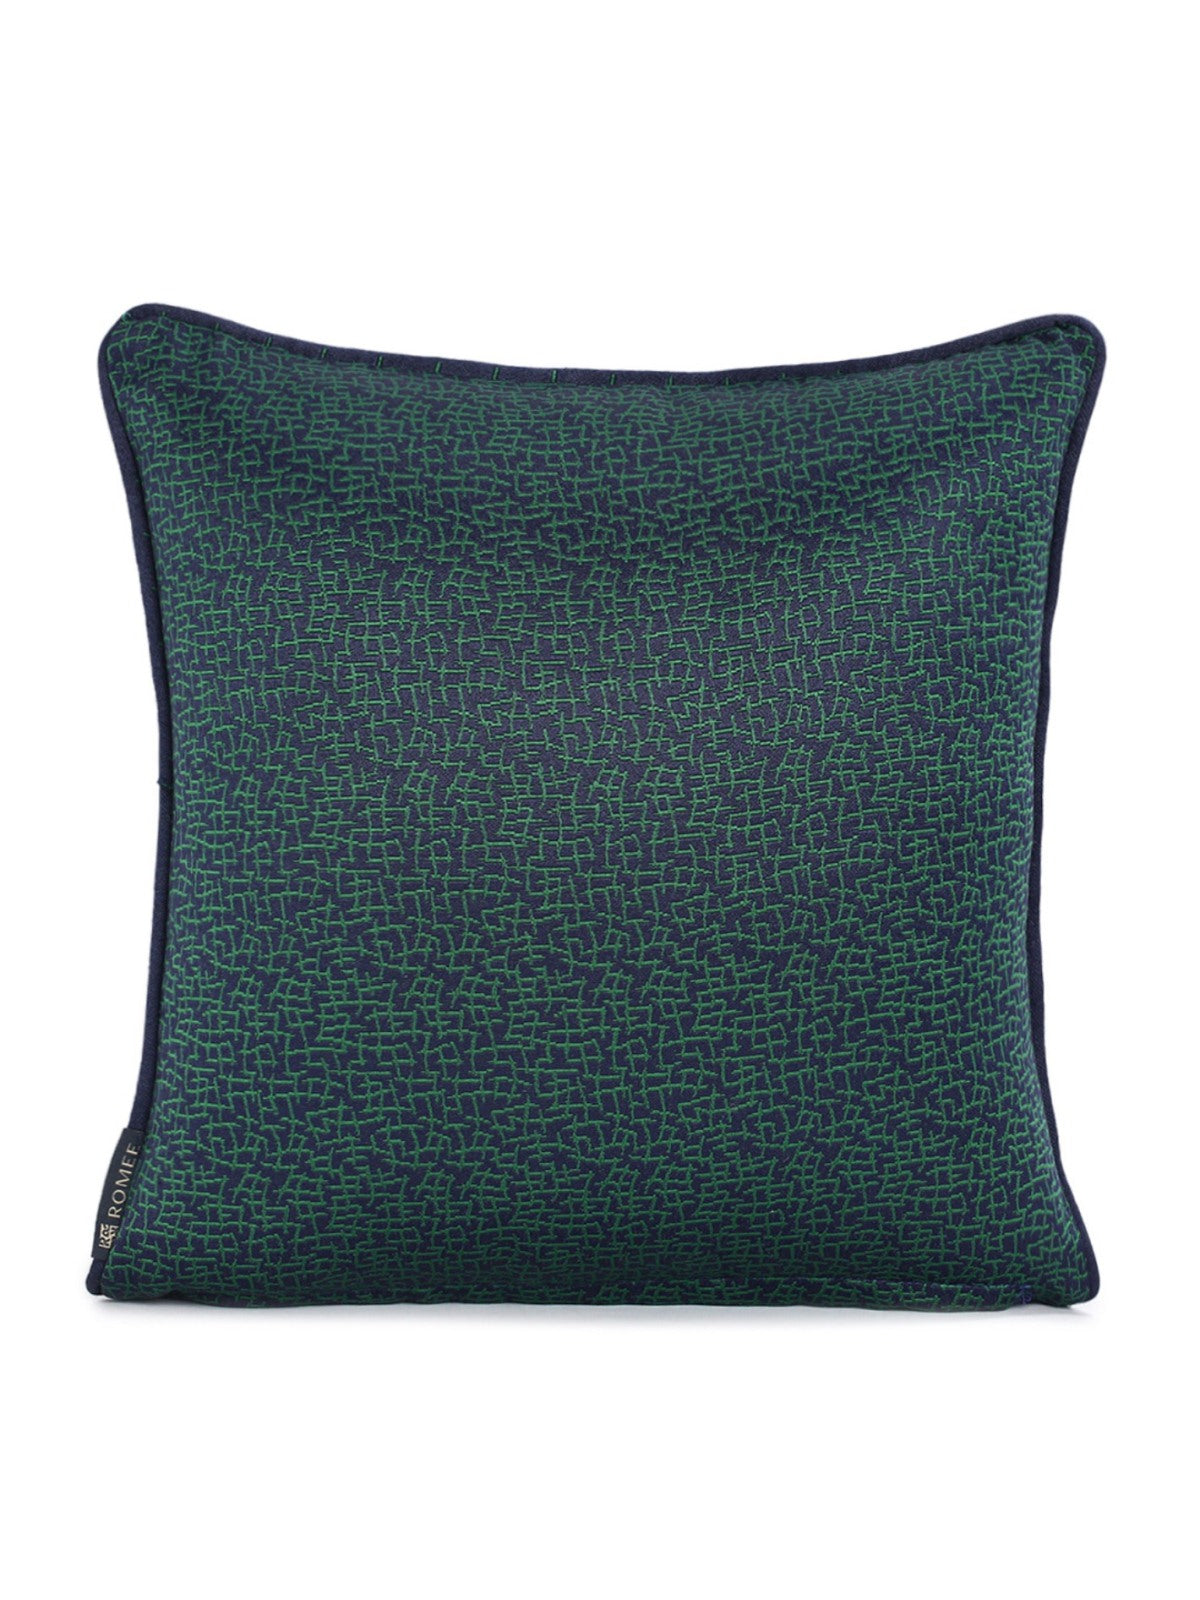 Soft Polyester Textured Designer Plain Cushion Covers 16 inch x 16 inch Set of 5 - Green & Navy Blue